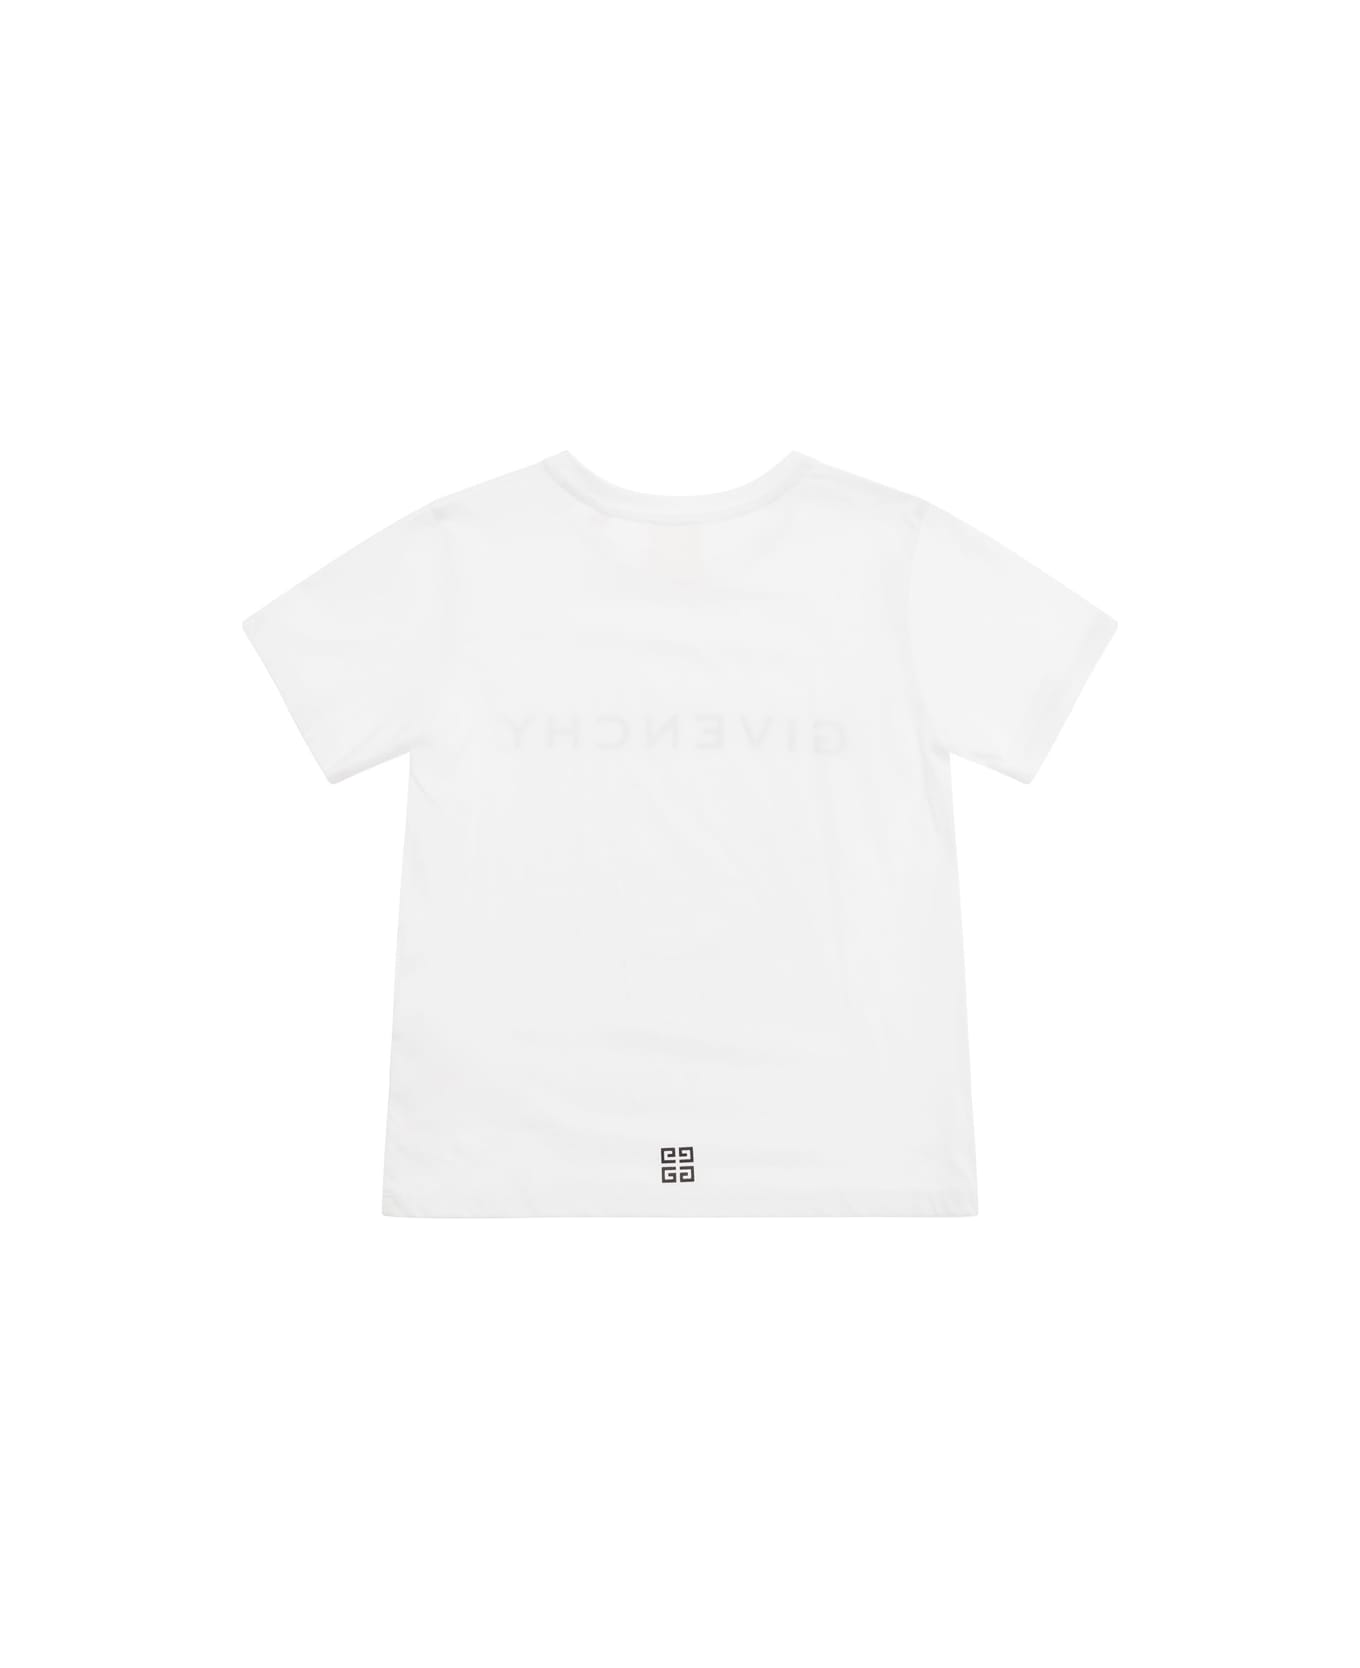 Givenchy H3007410p - Bianco